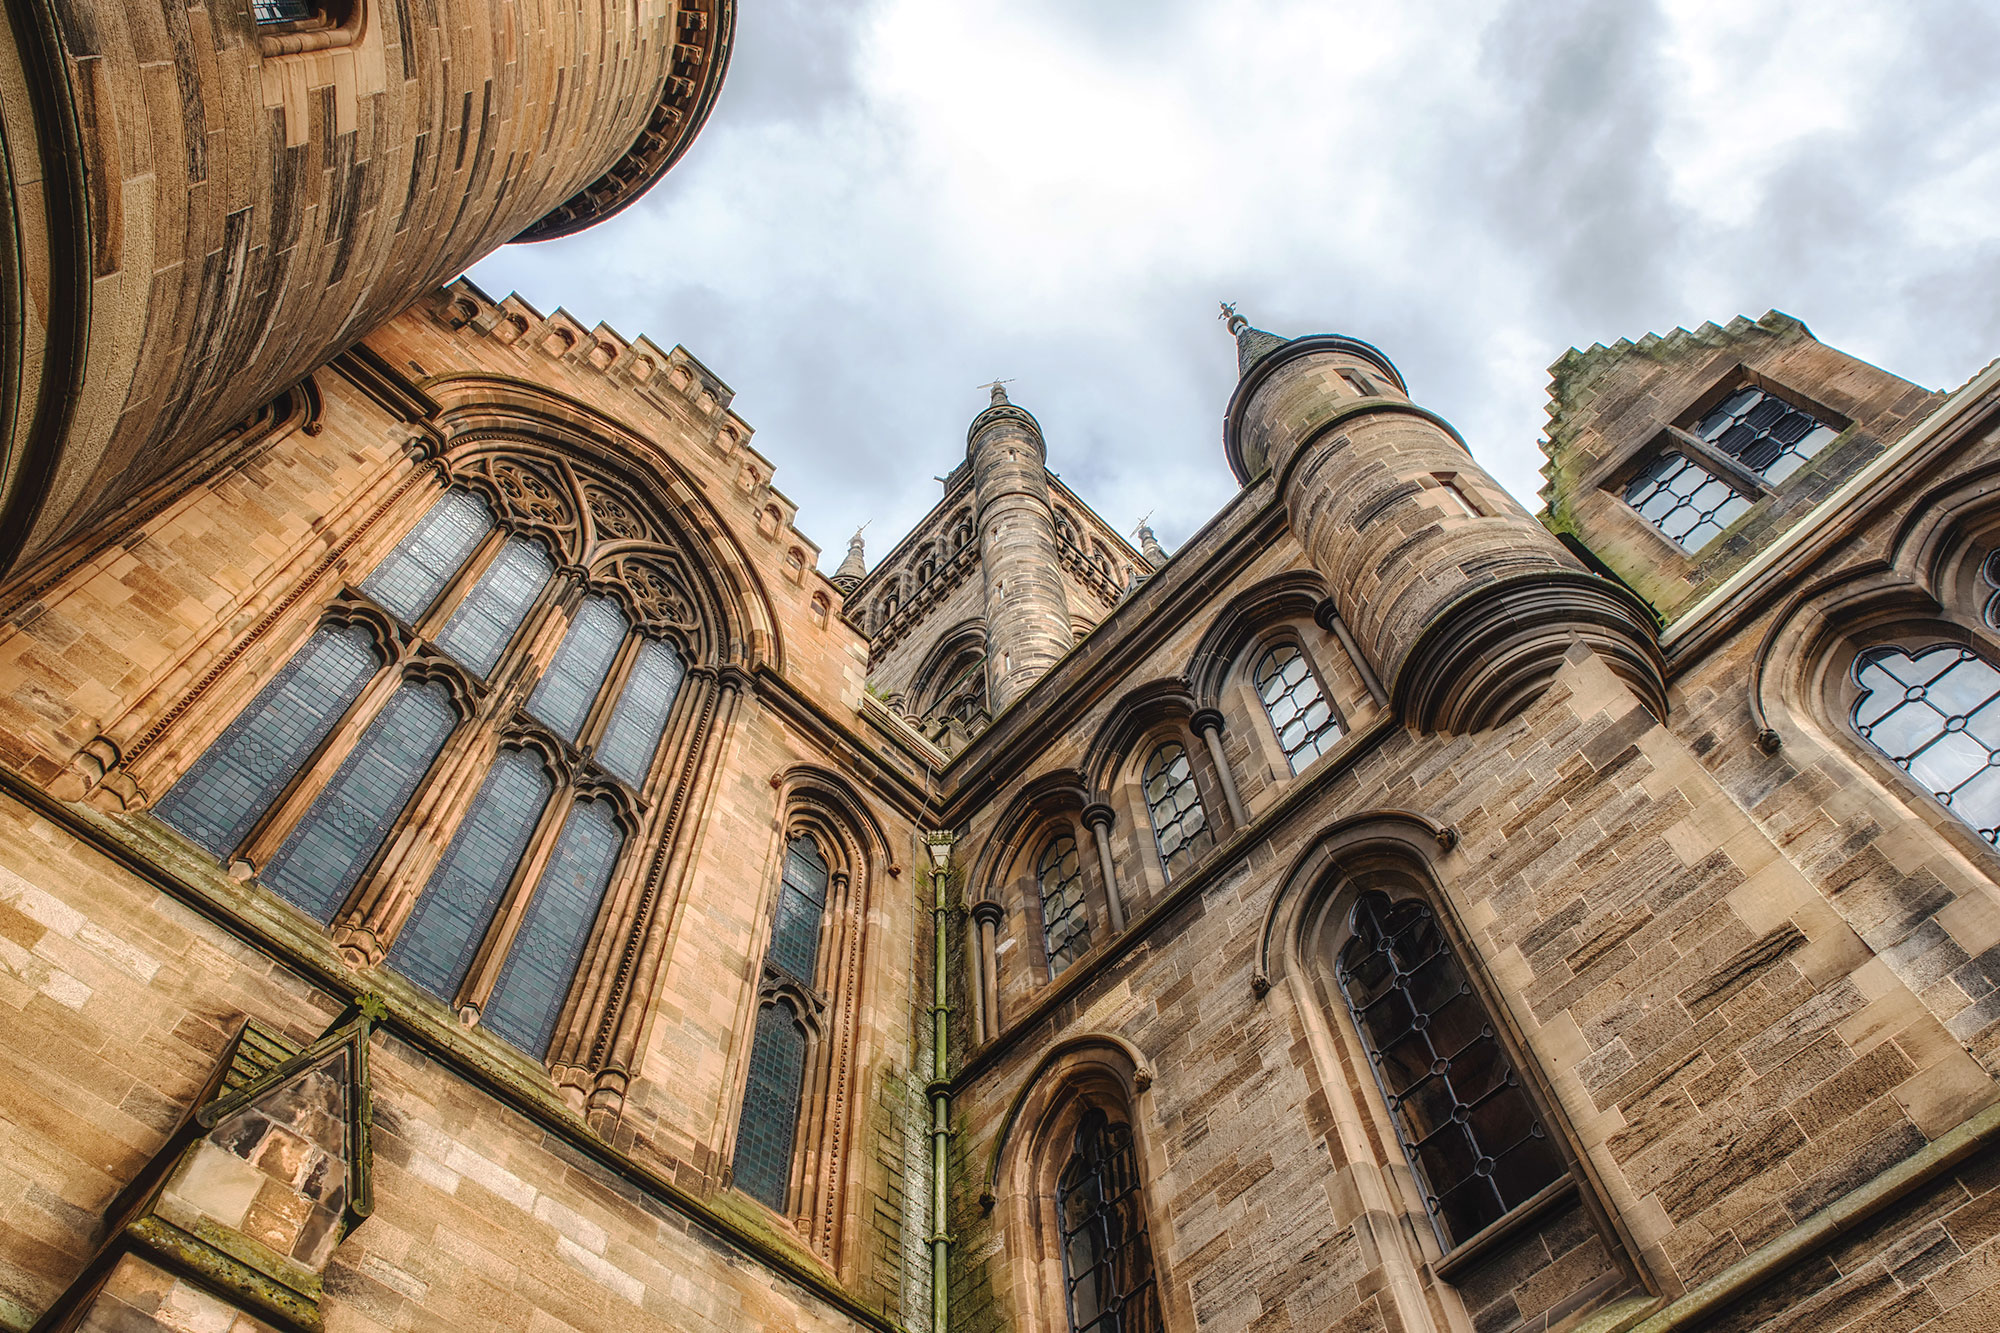 View looking up at exterior of the Main Building of the University of Glasgow, Scotland